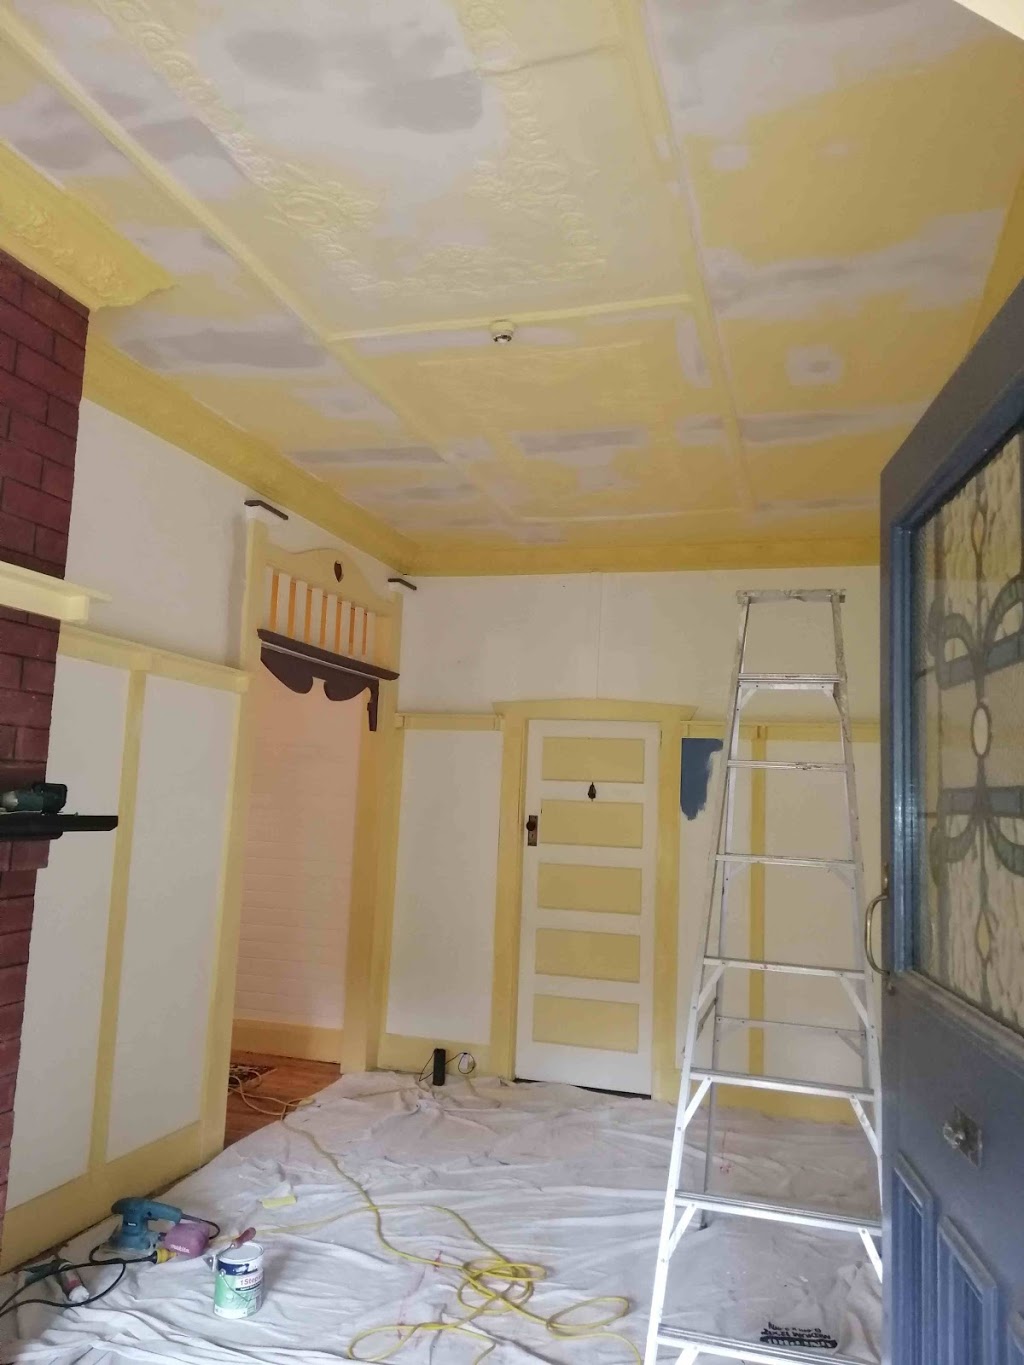 David Morrall Painting and Decorating and handyman services |  | 36 Panorama Cres, Wentworth Falls NSW 2782, Australia | 0484762086 OR +61 484 762 086